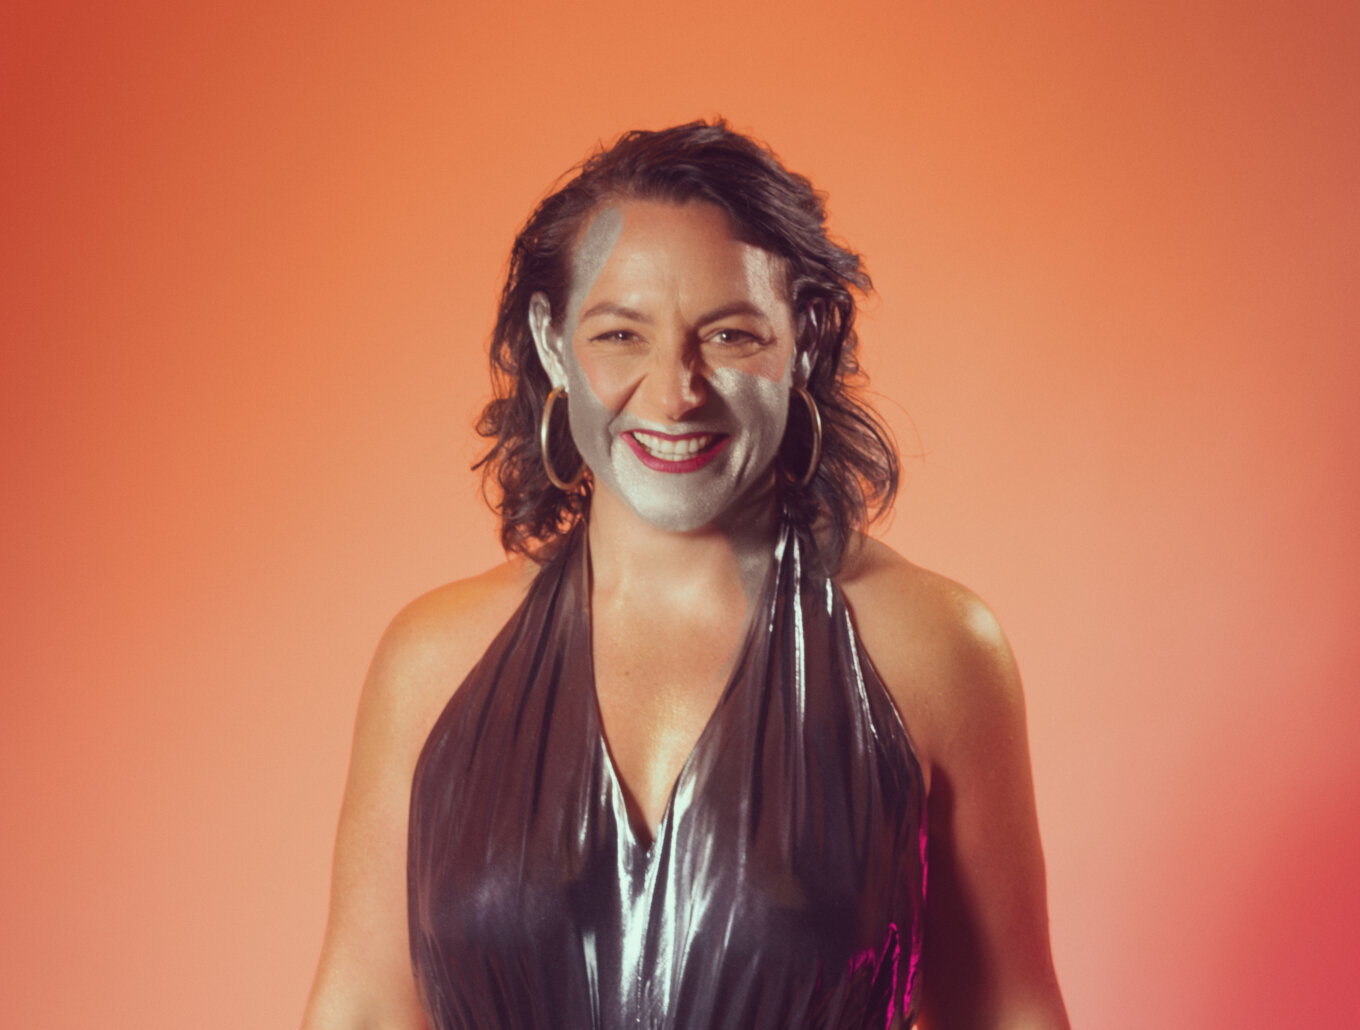 A smiling woman has metallic paint across her face.